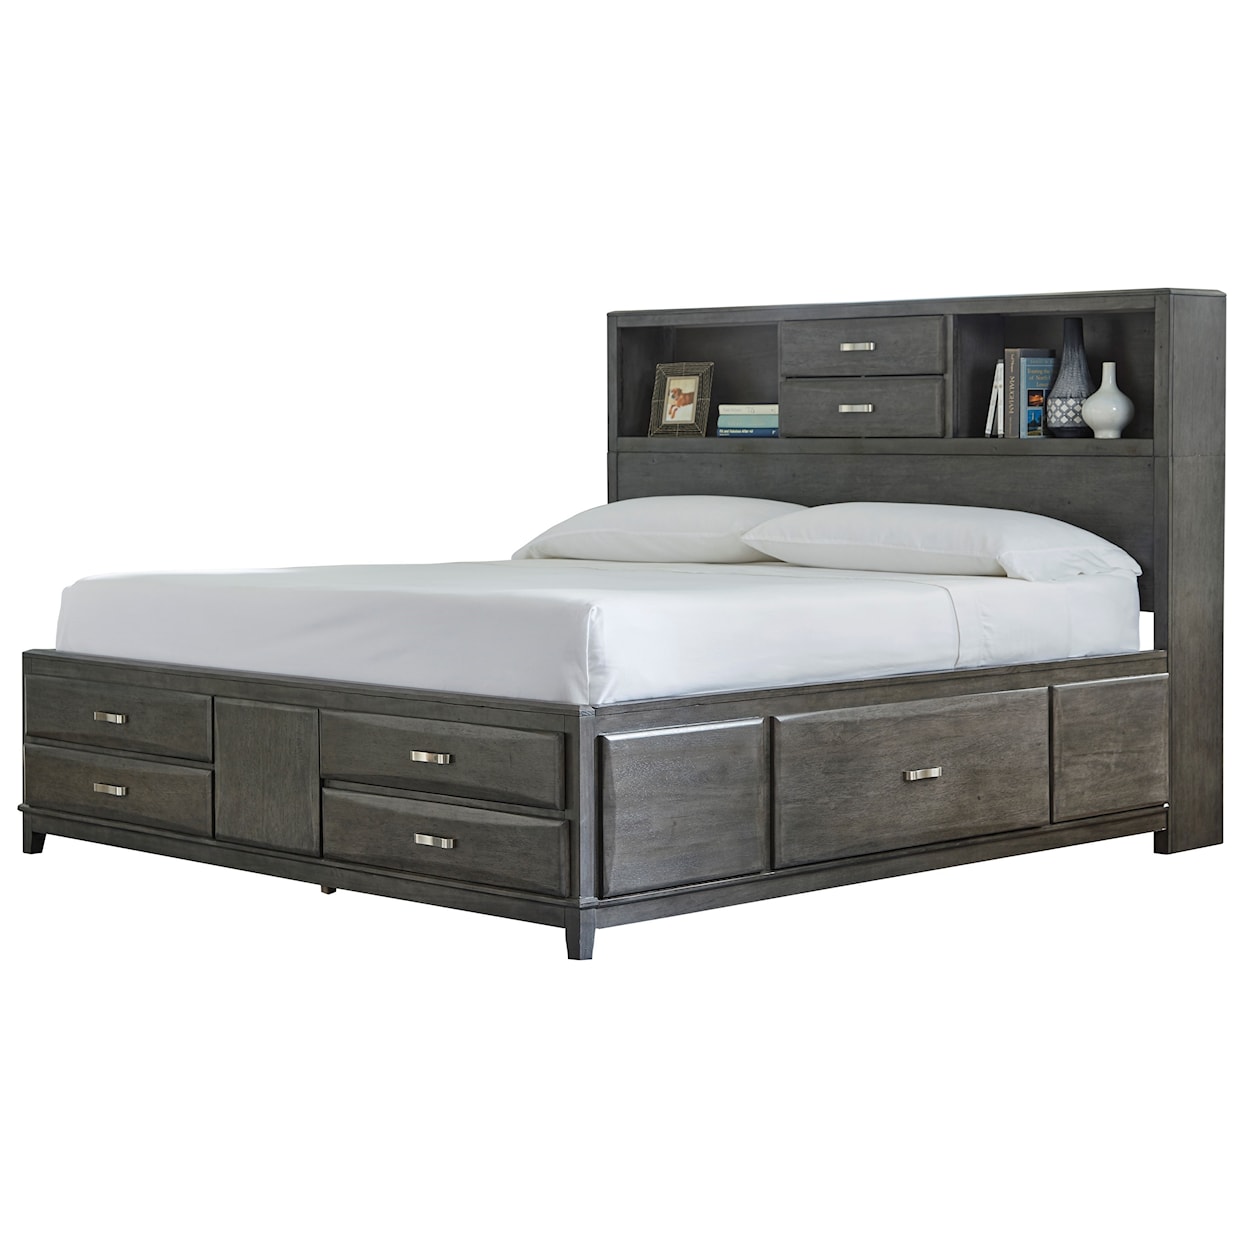 Signature Caitlyn California King Storage Bed with 8 Drawers